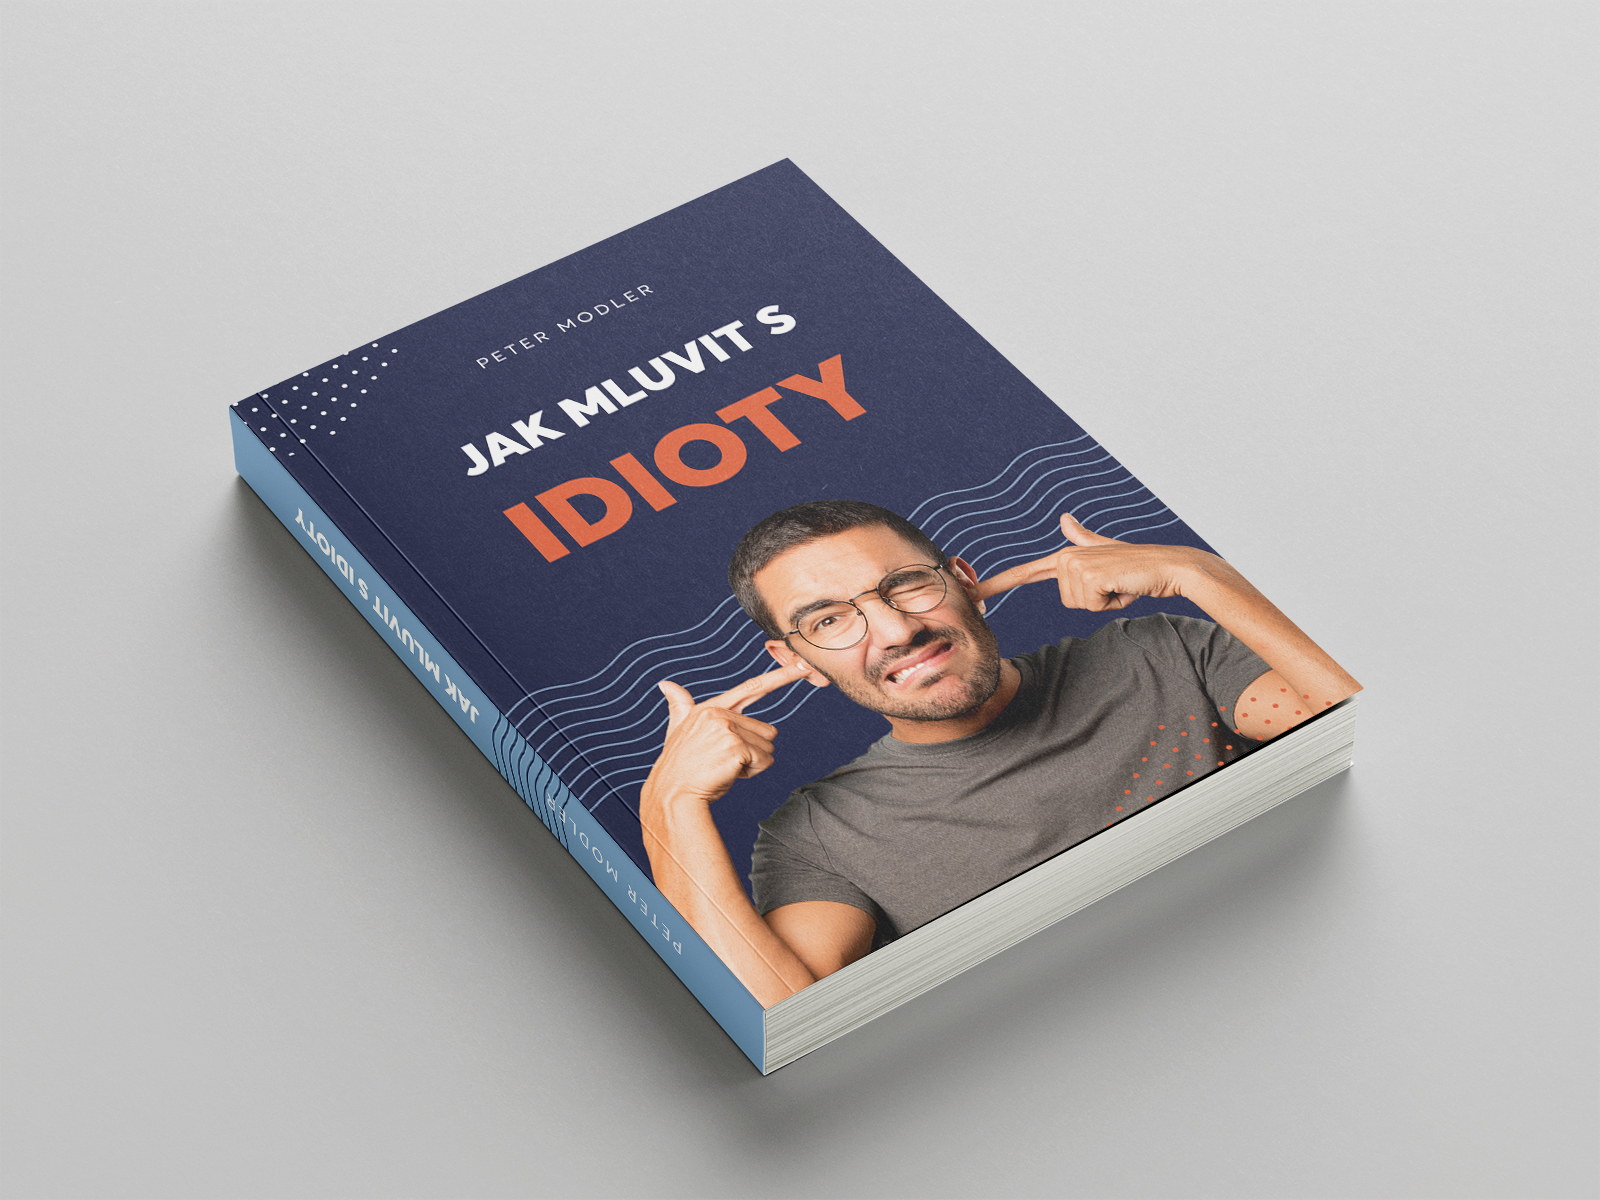 Book Jak mluvit s idioty, Peter Modler